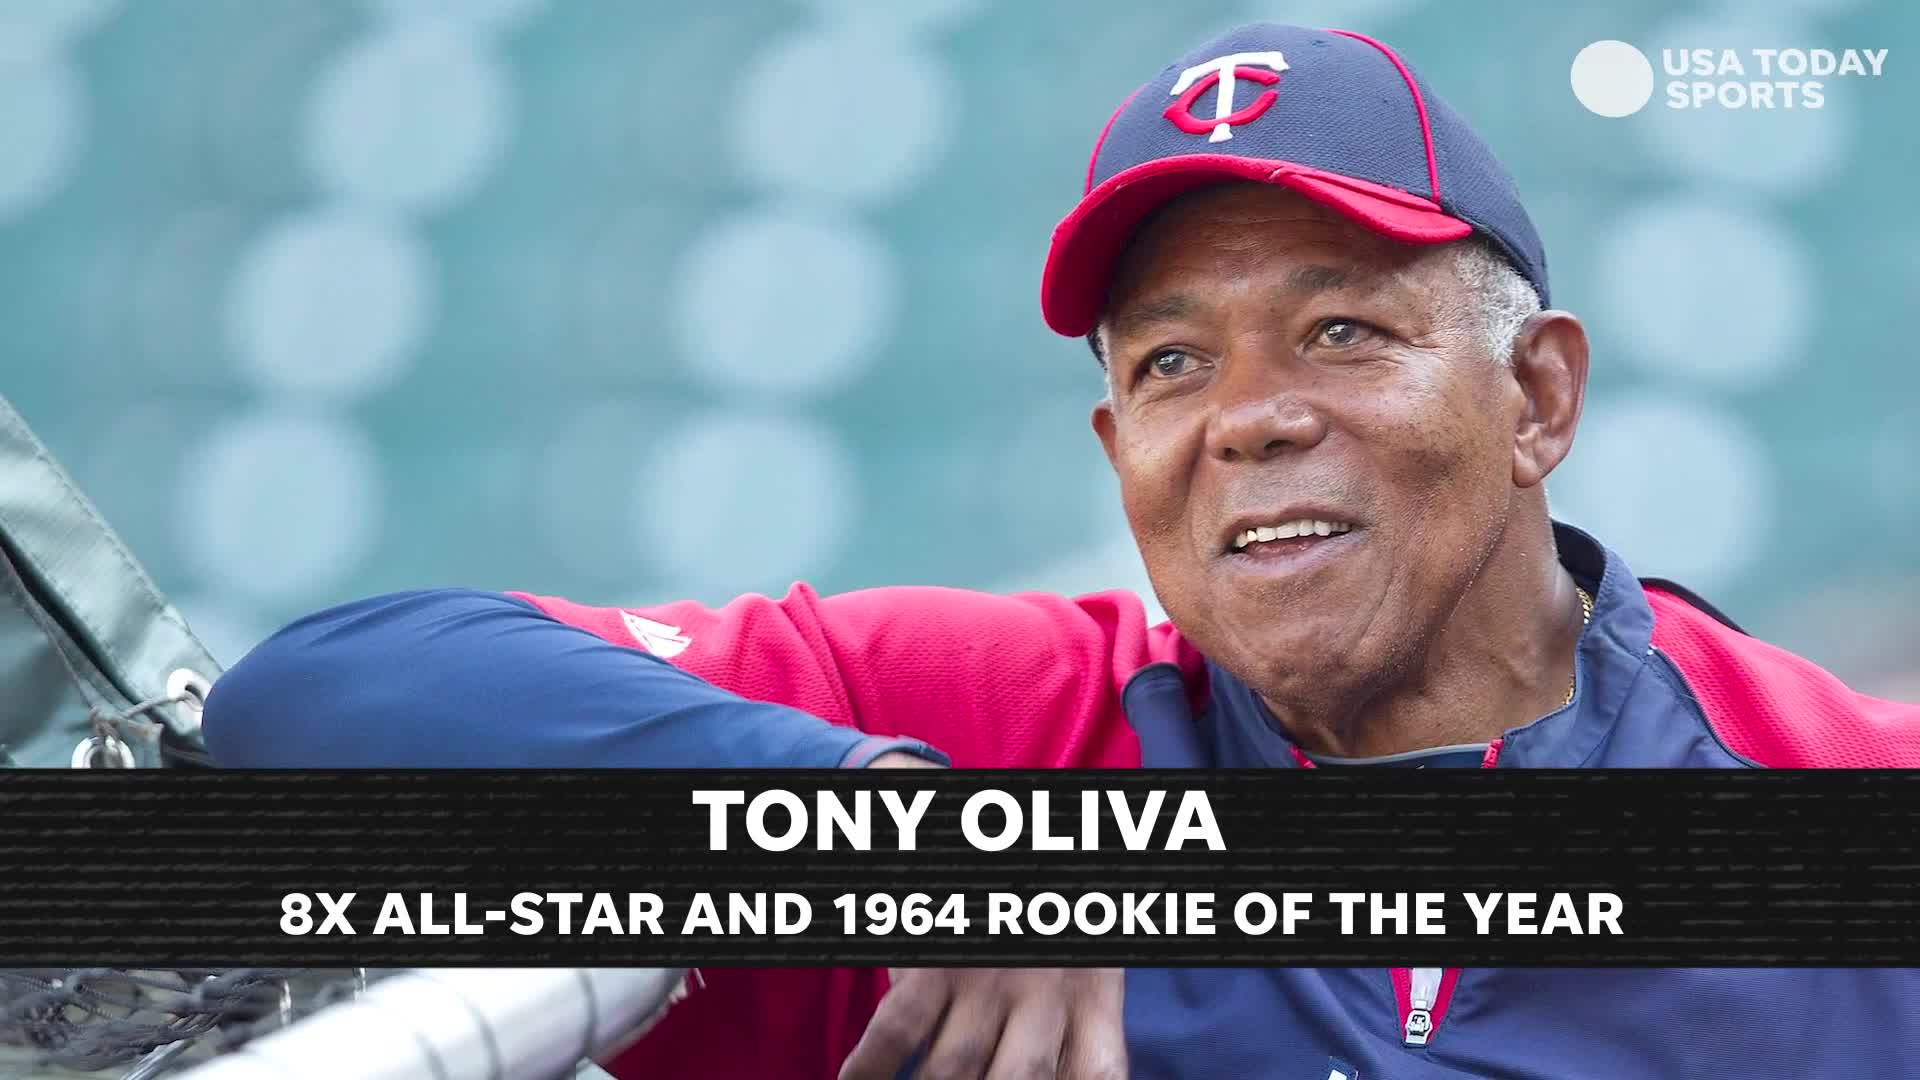 Sen. Amy Klobuchar helps Tony Oliva reunite with brother from Cuba for Hall  of Fame induction